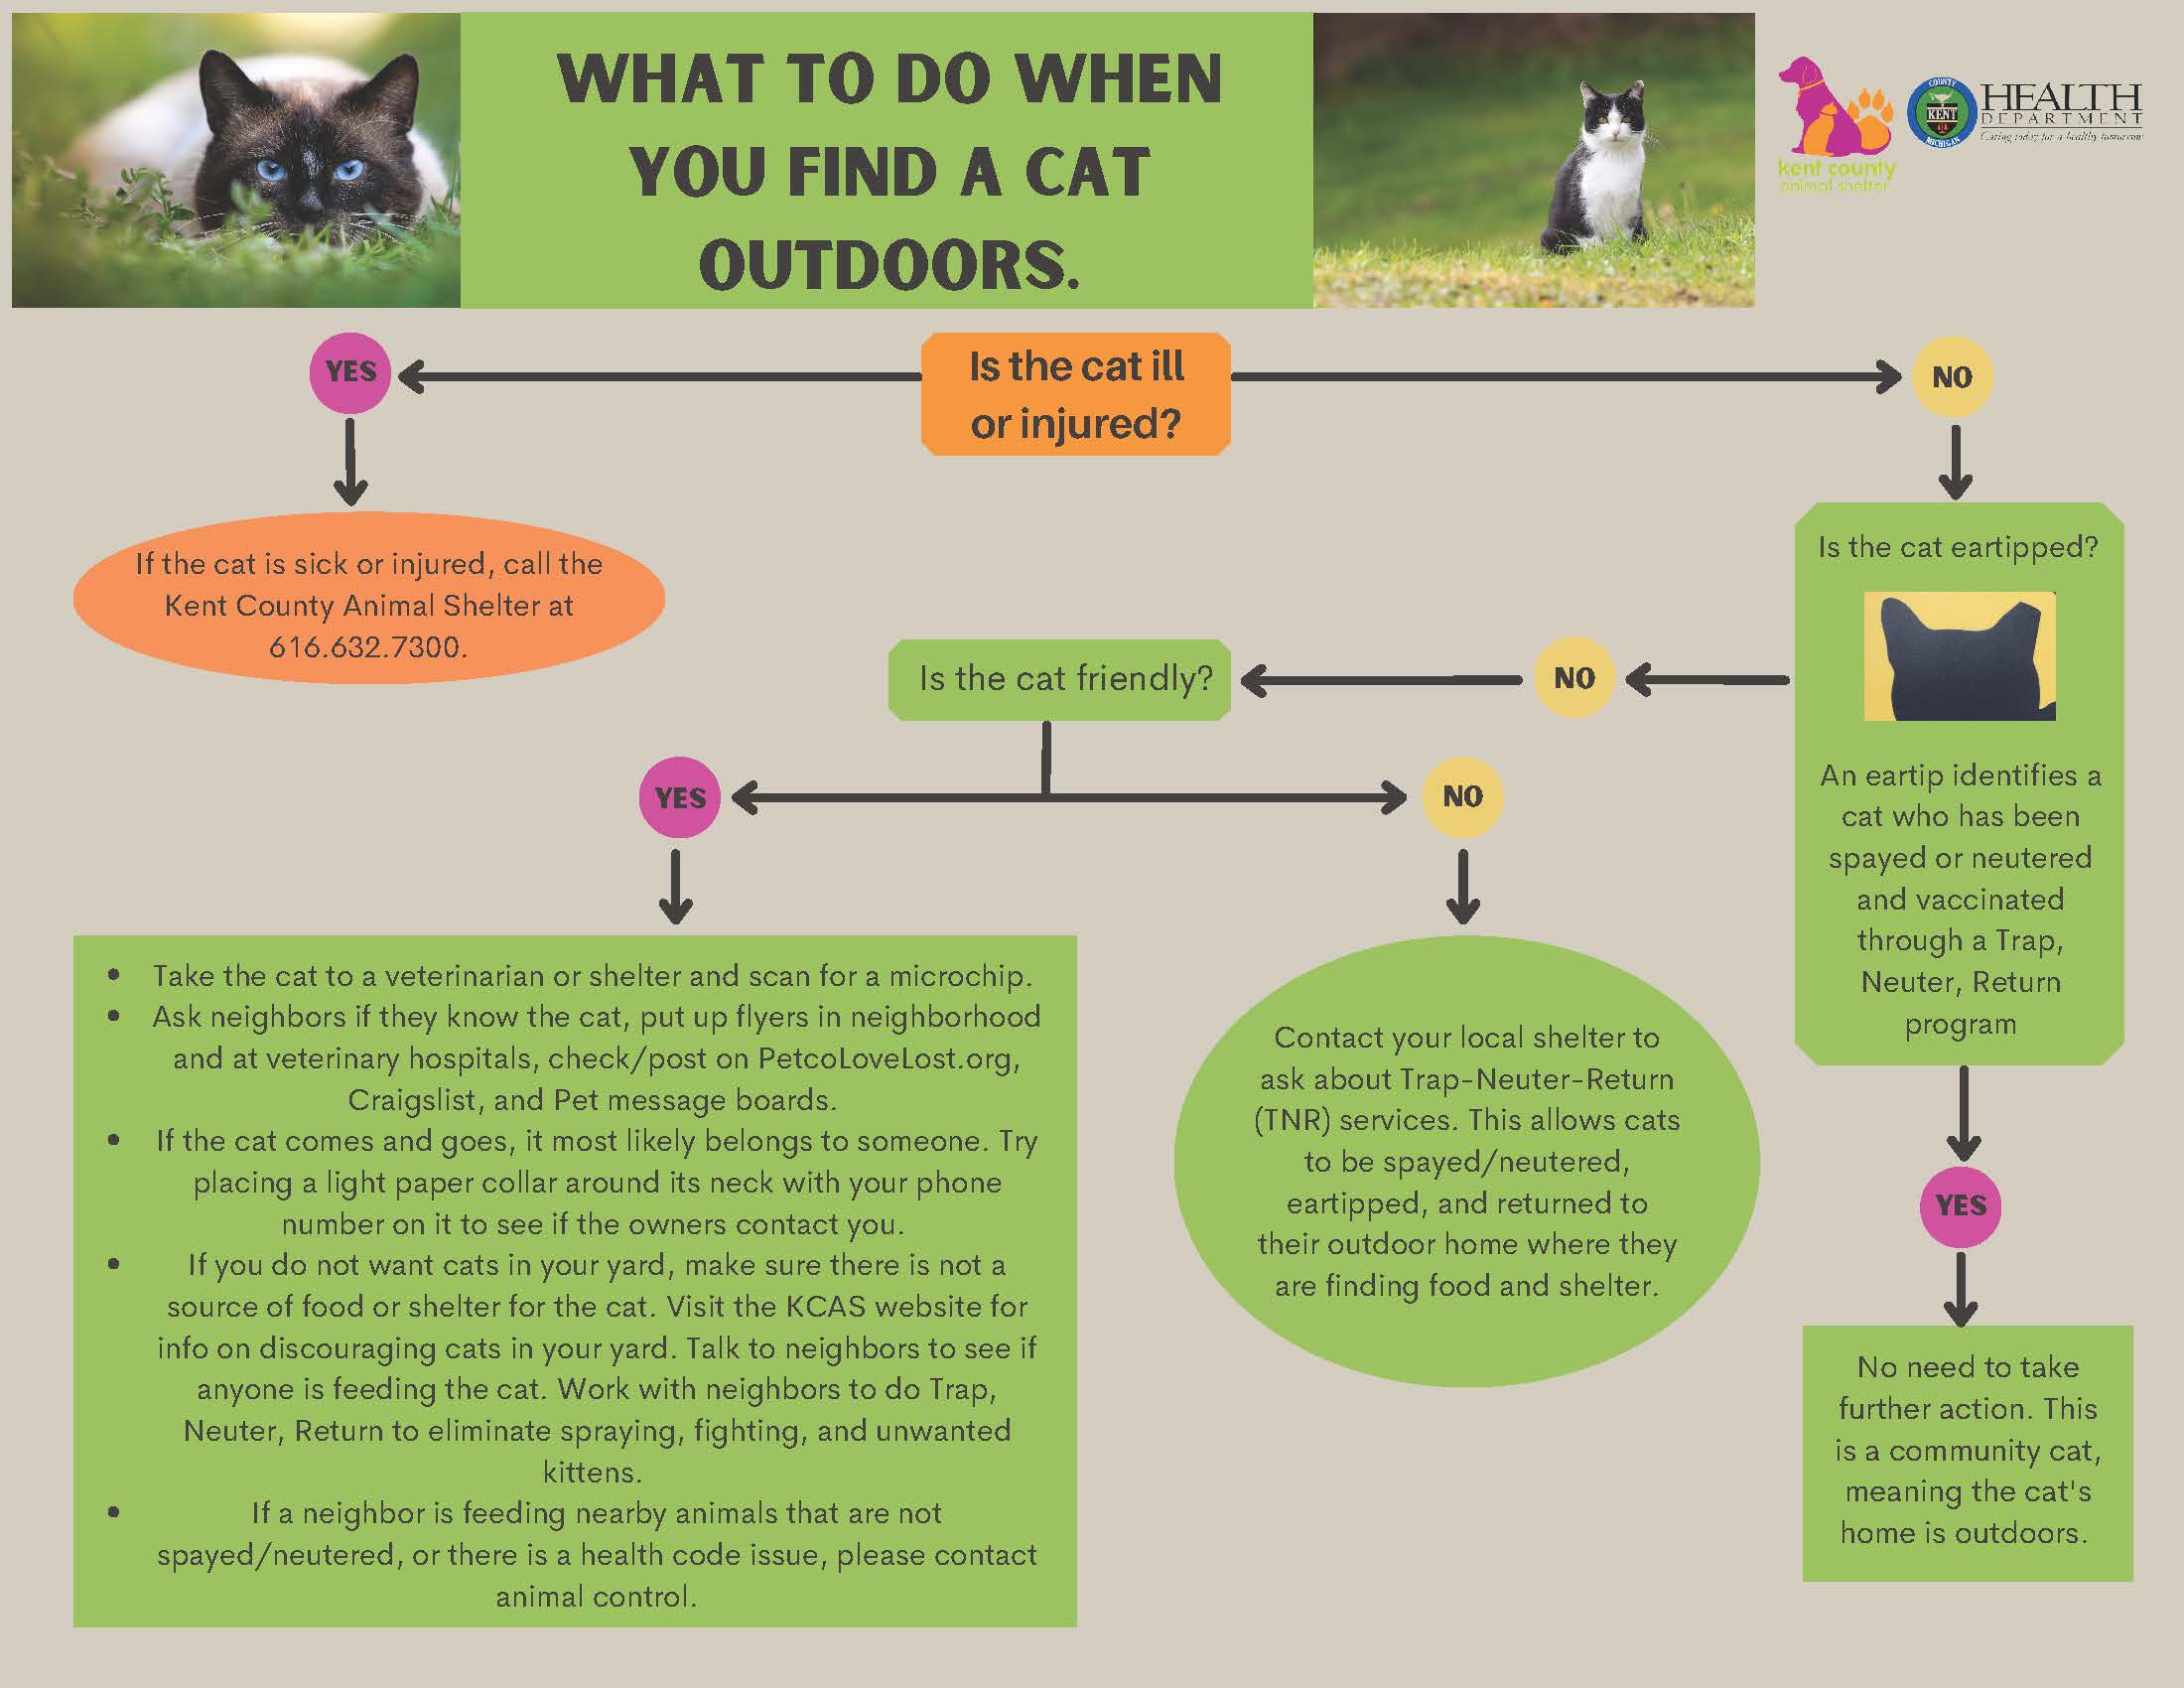 What to do when you find a cat outdoors